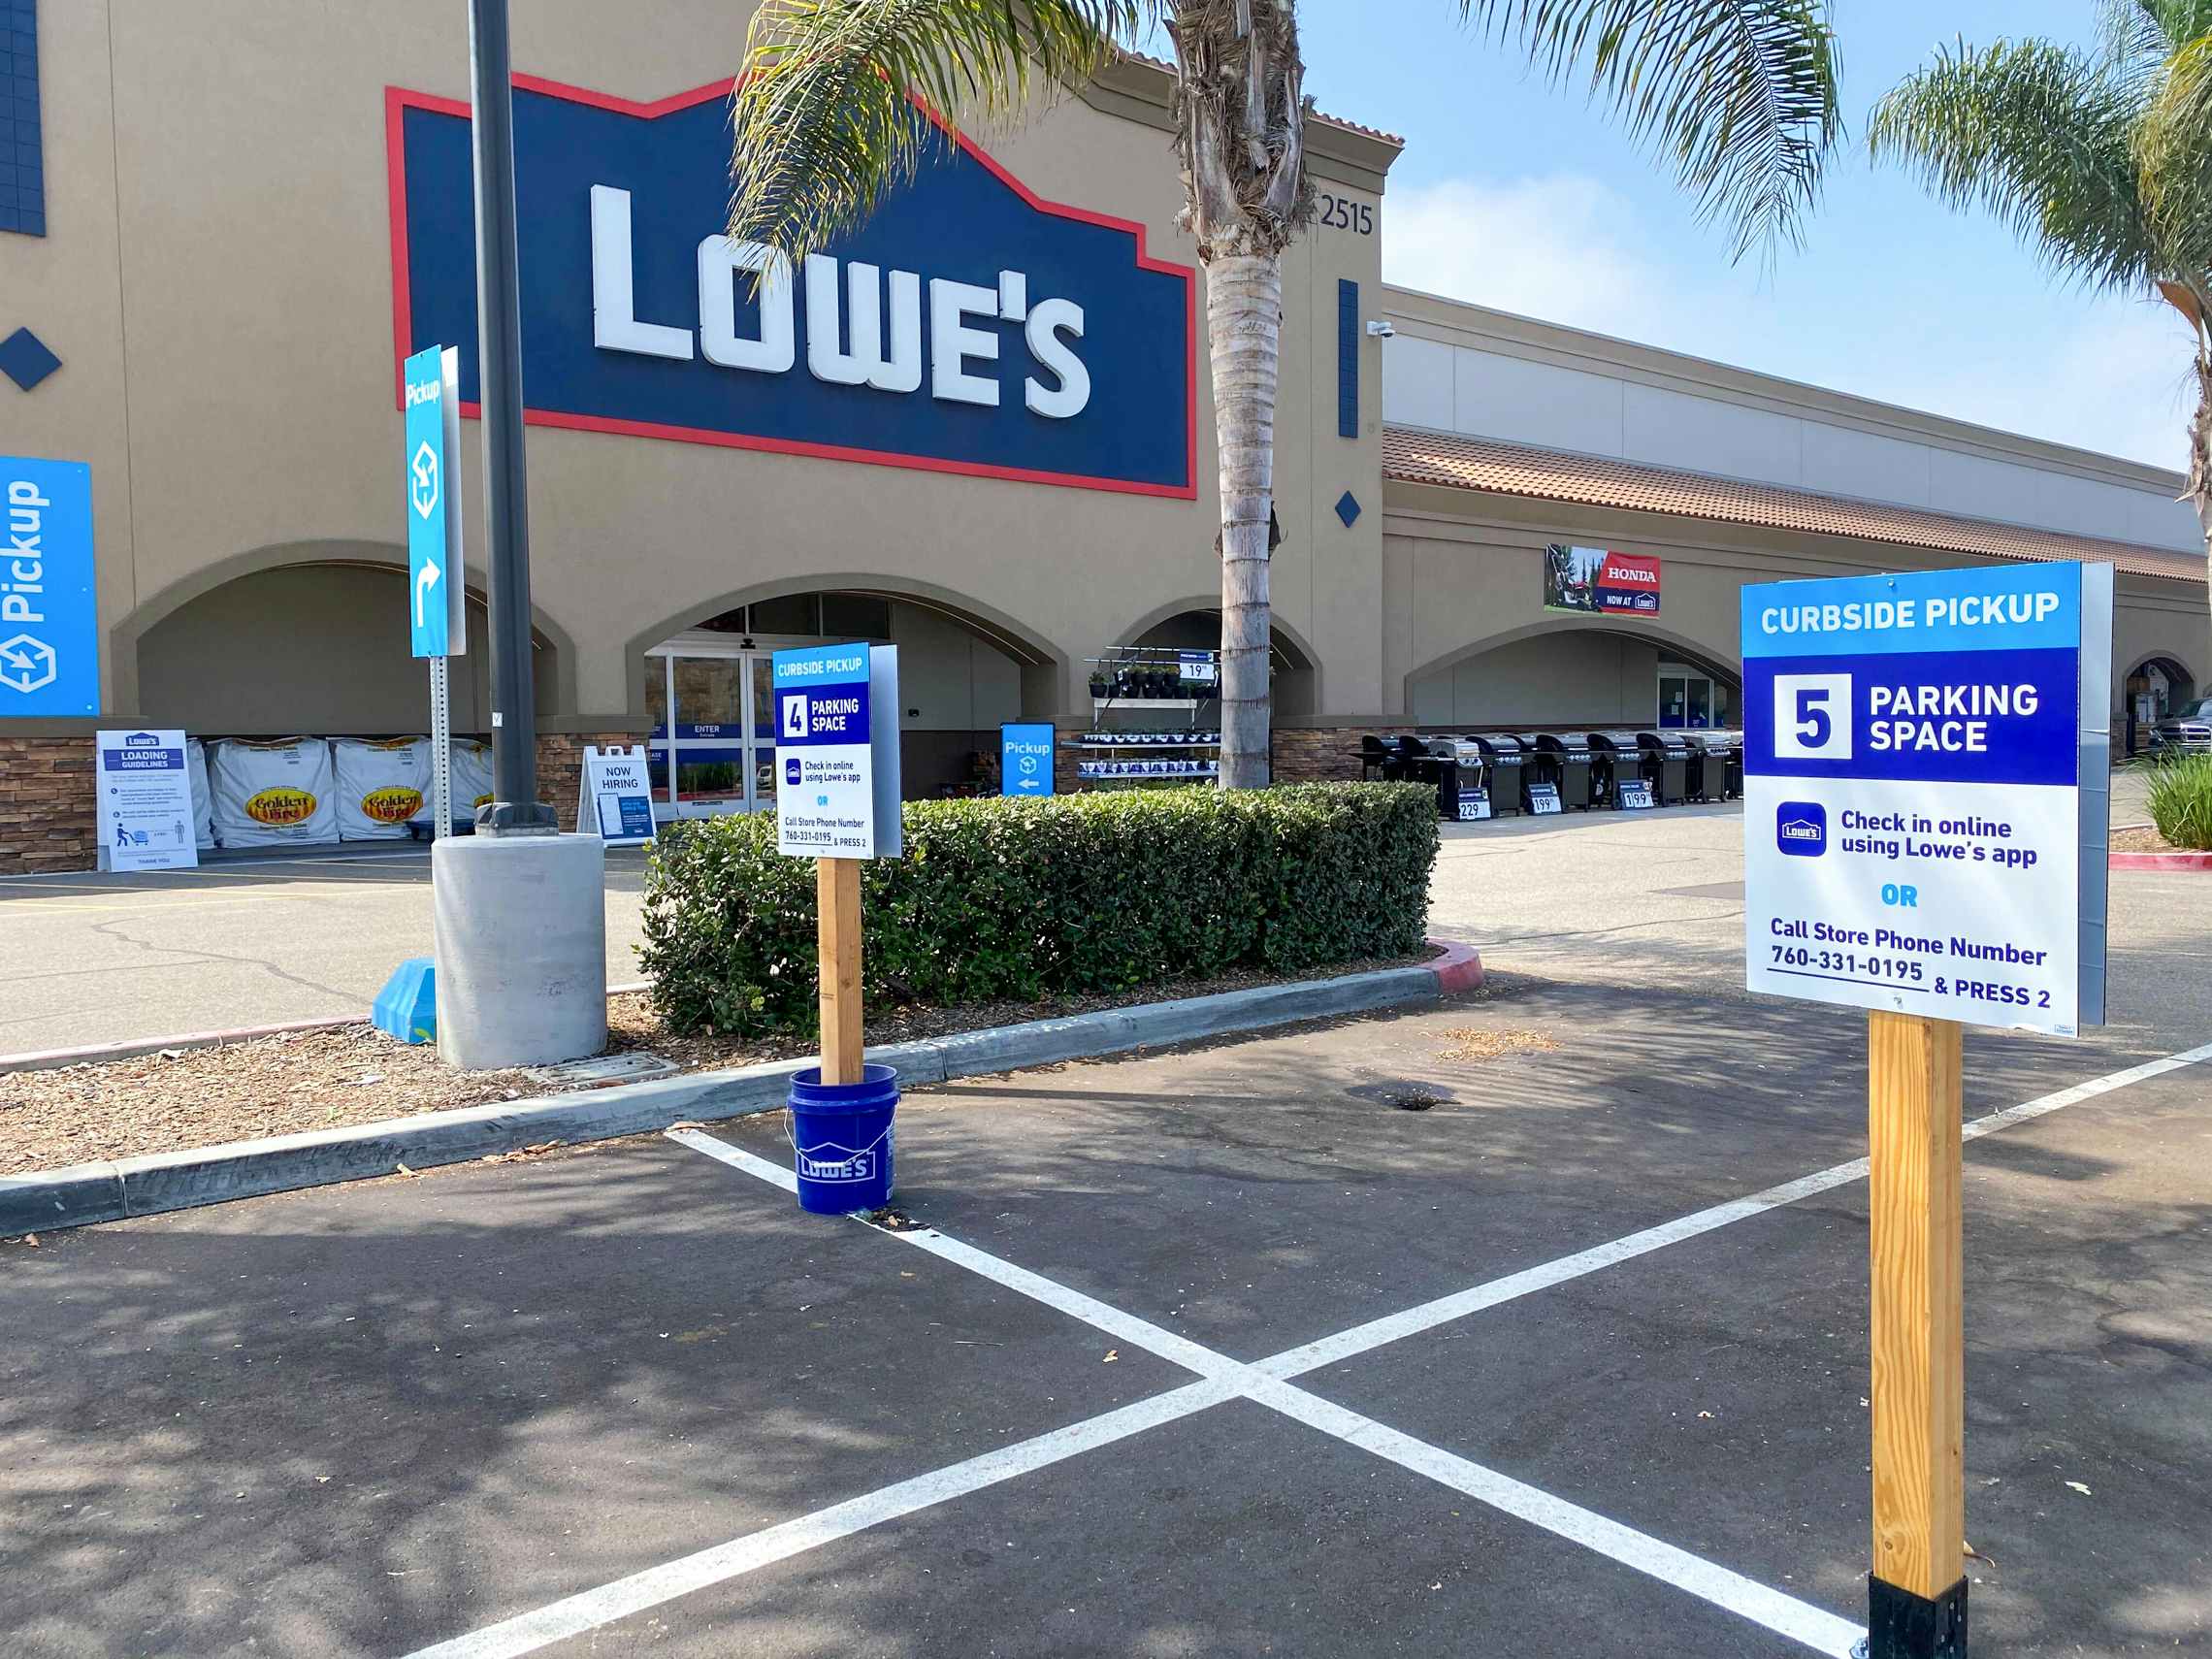 Lowe's curbside pickup parking spots in front of the Lowe's store.